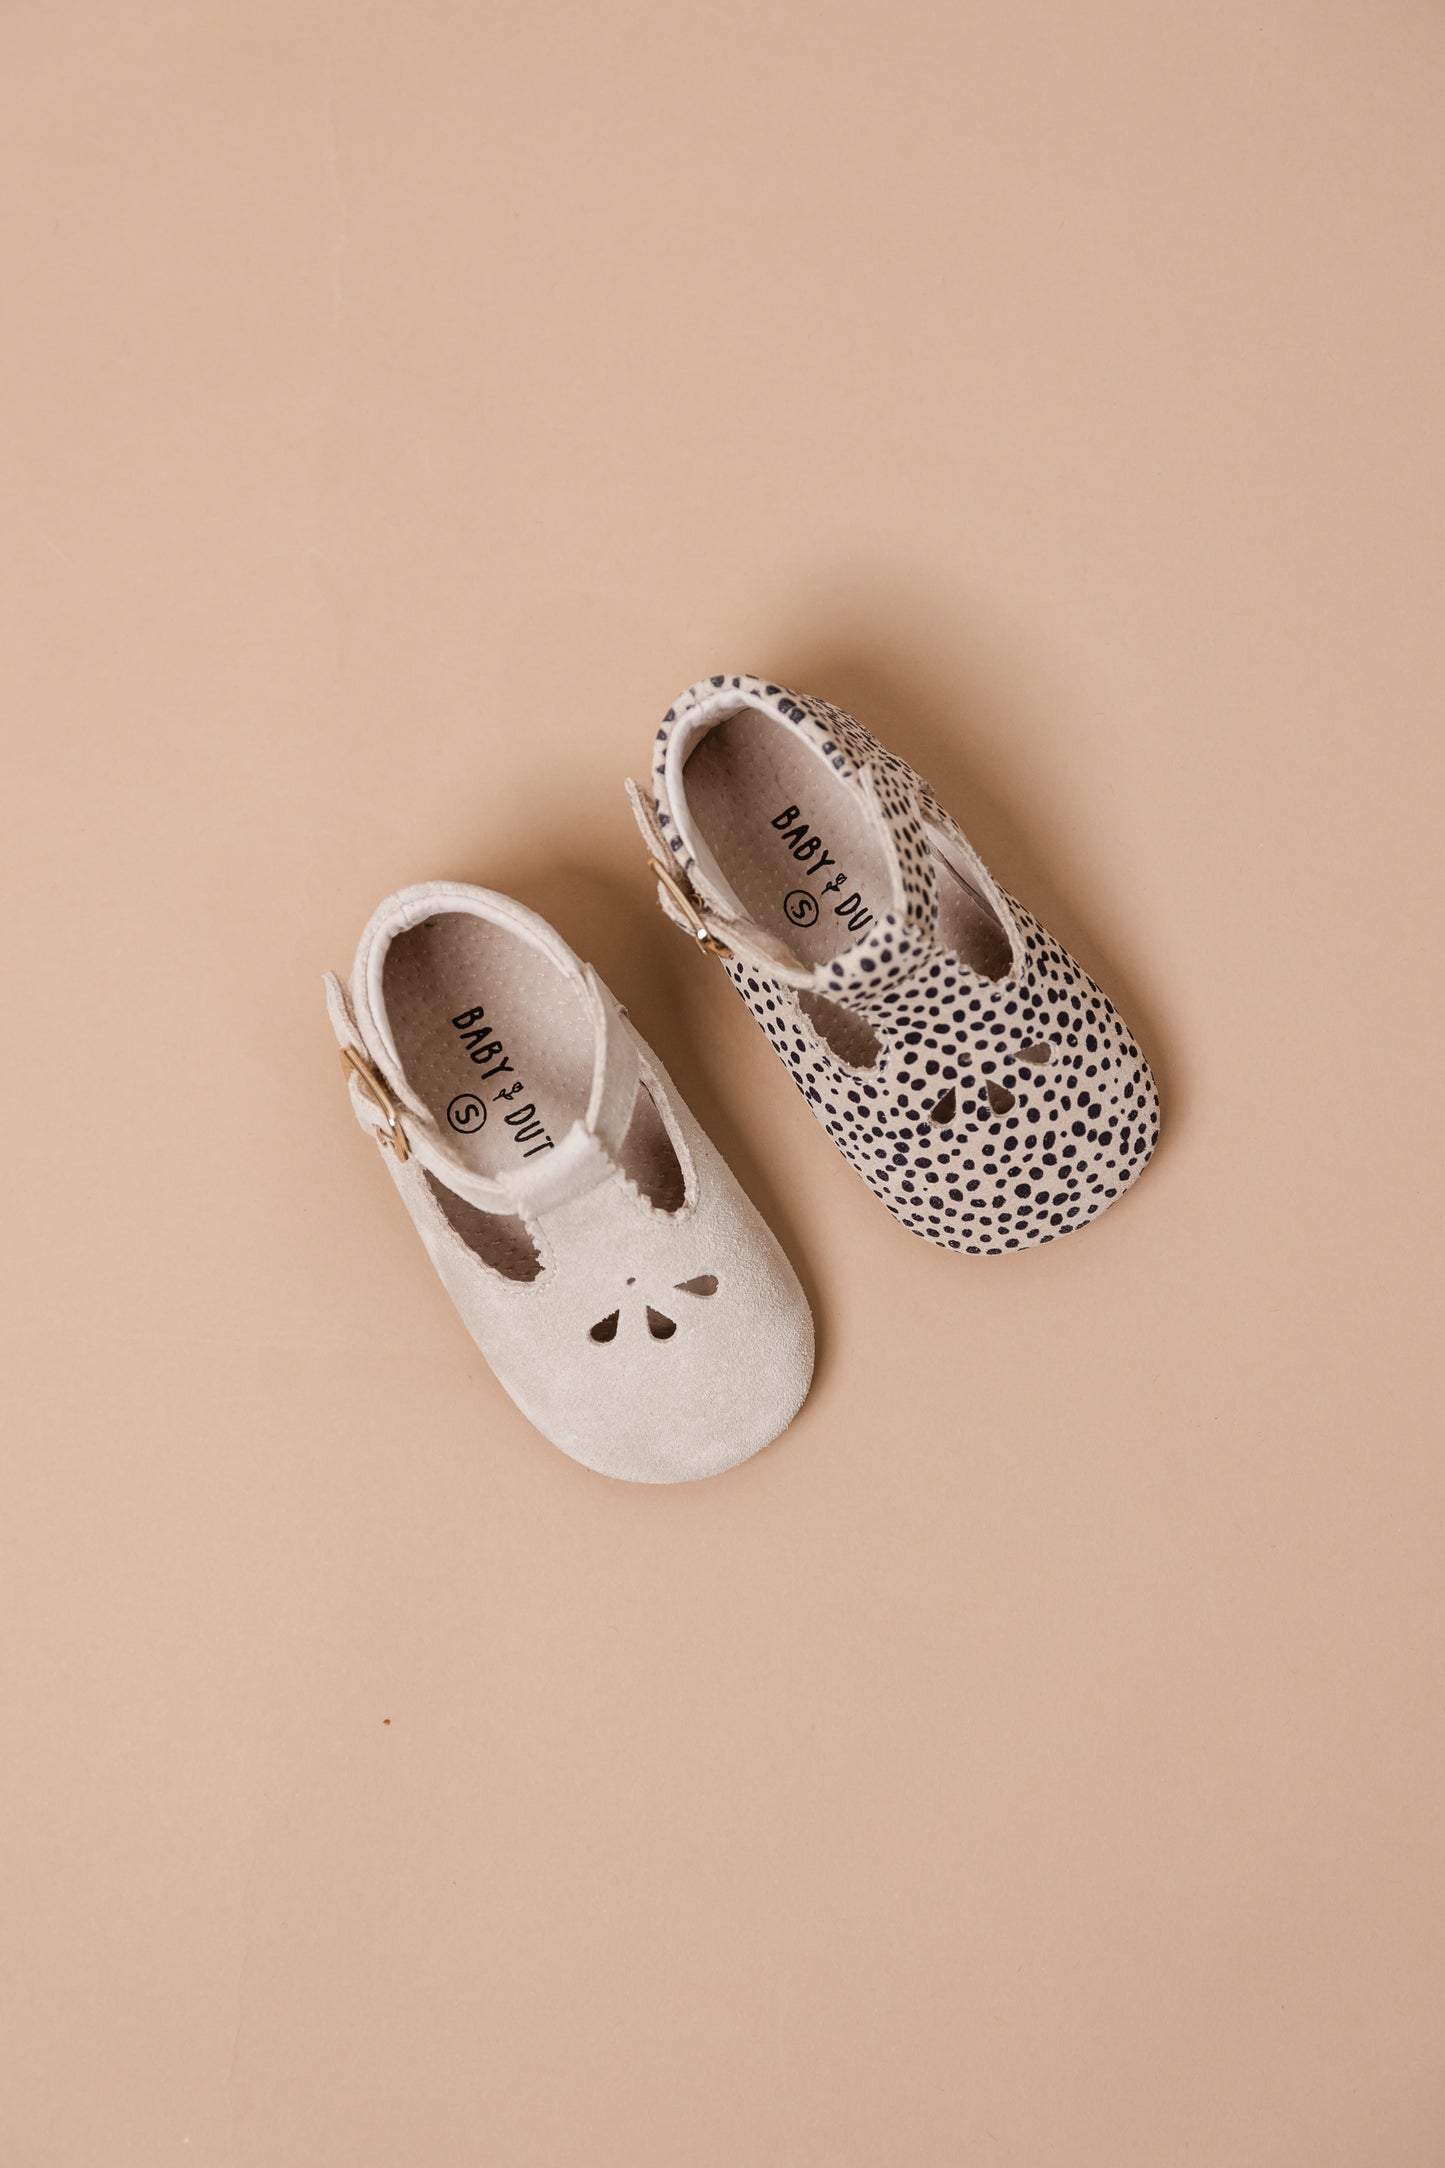 Evi | Babyboots | Speckle suede